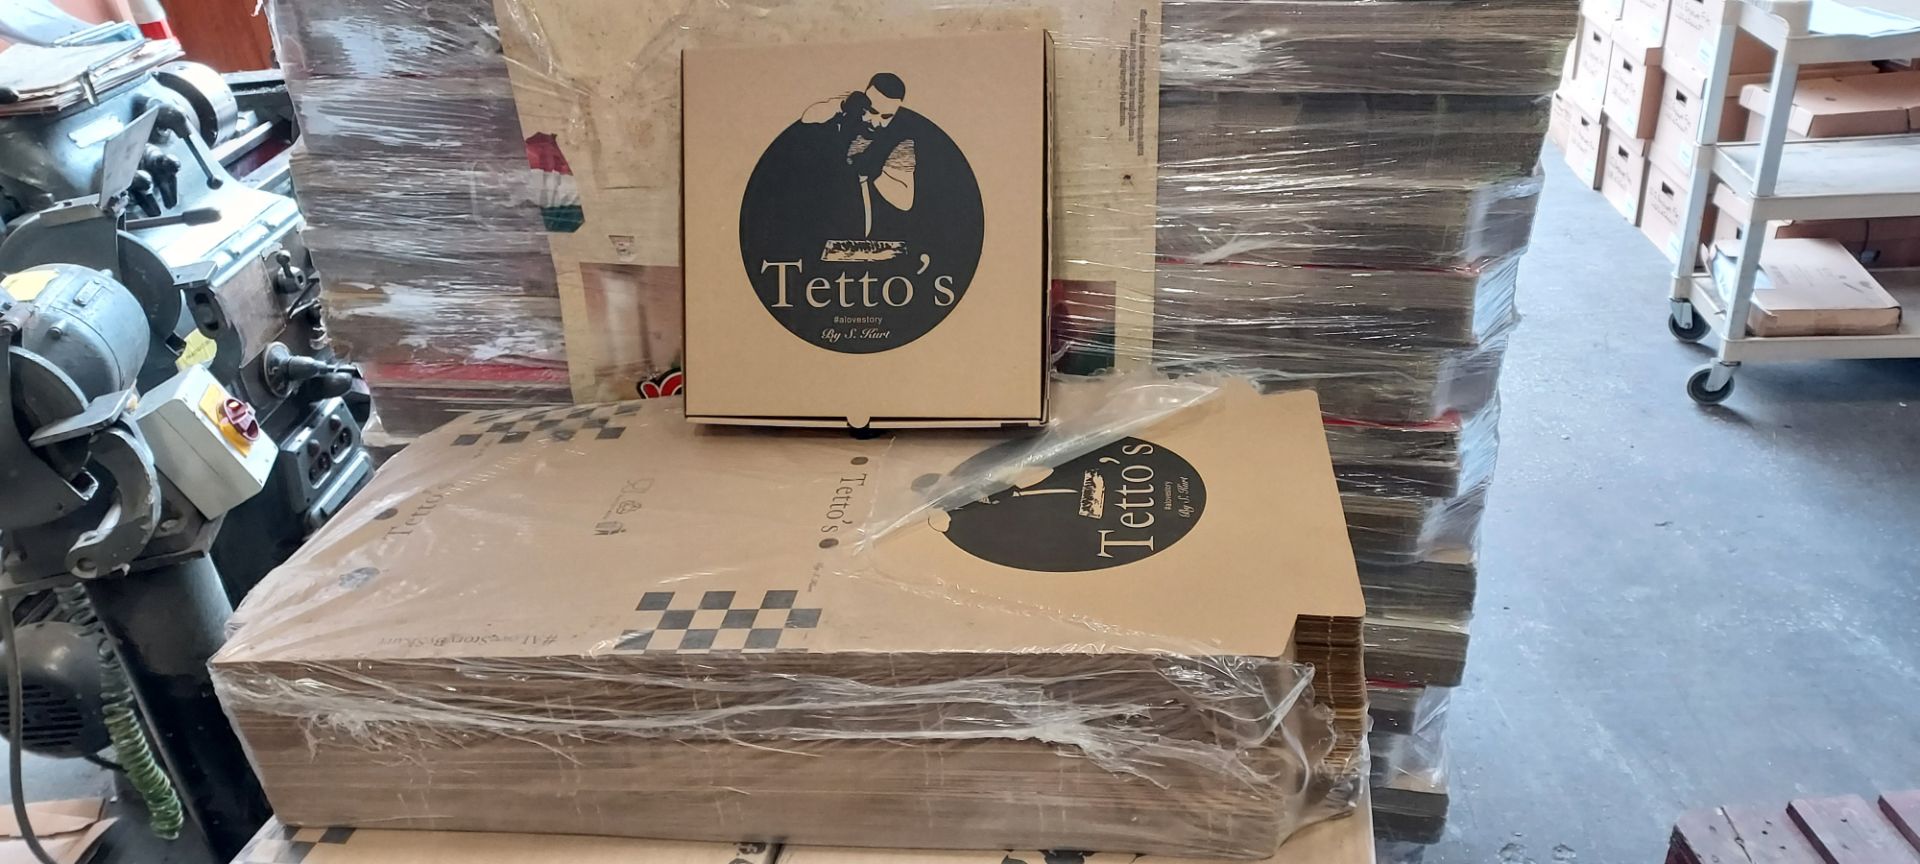 600 X BRAND NEW 12 INCH PIZZA BOXES - IN 6 PACKS OF 100 TETTO'S